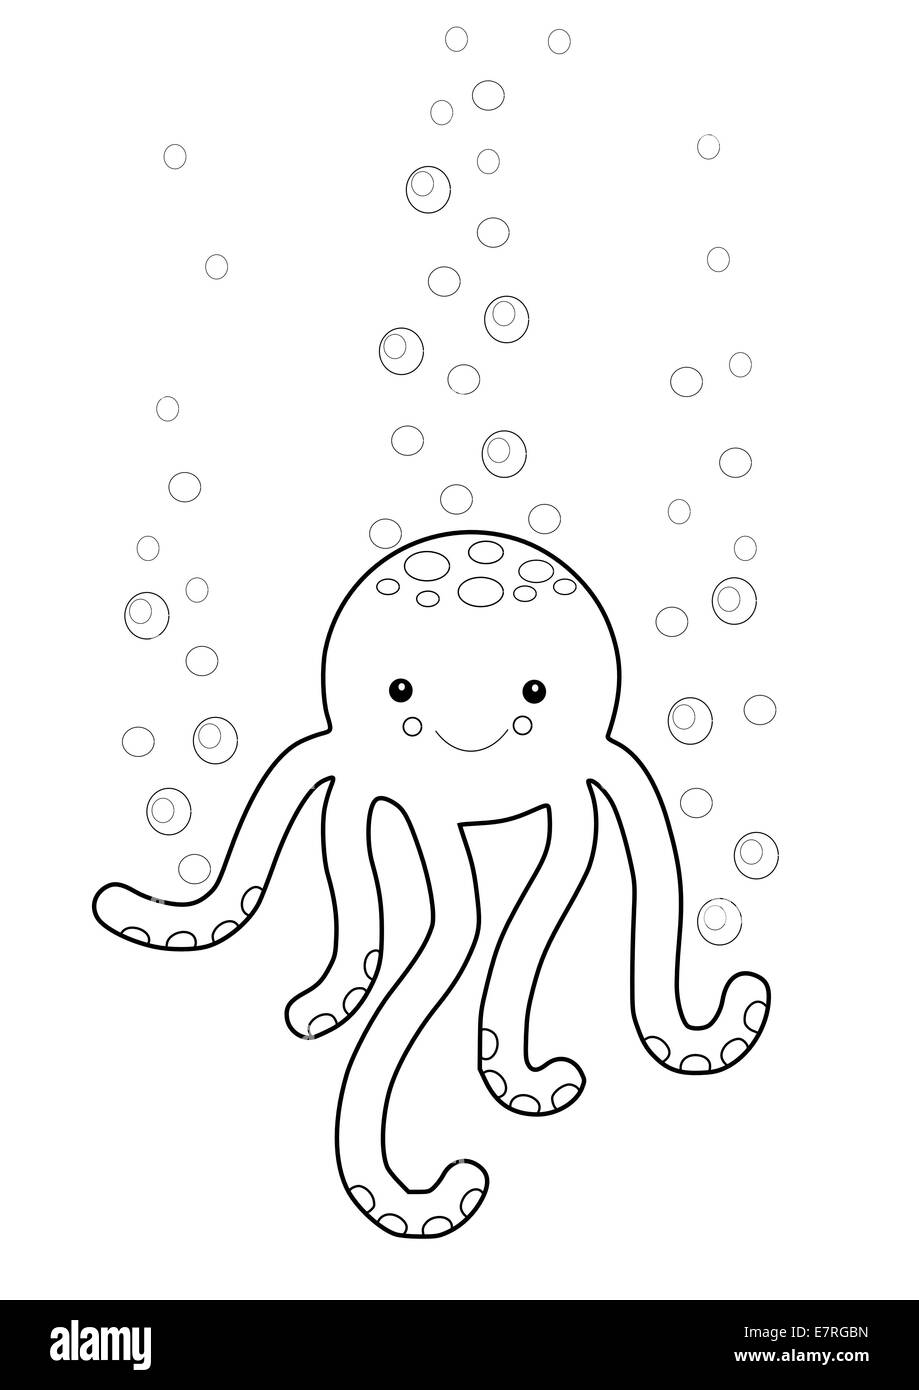 Coloring book with octopus - vector illustration. Stock Photo